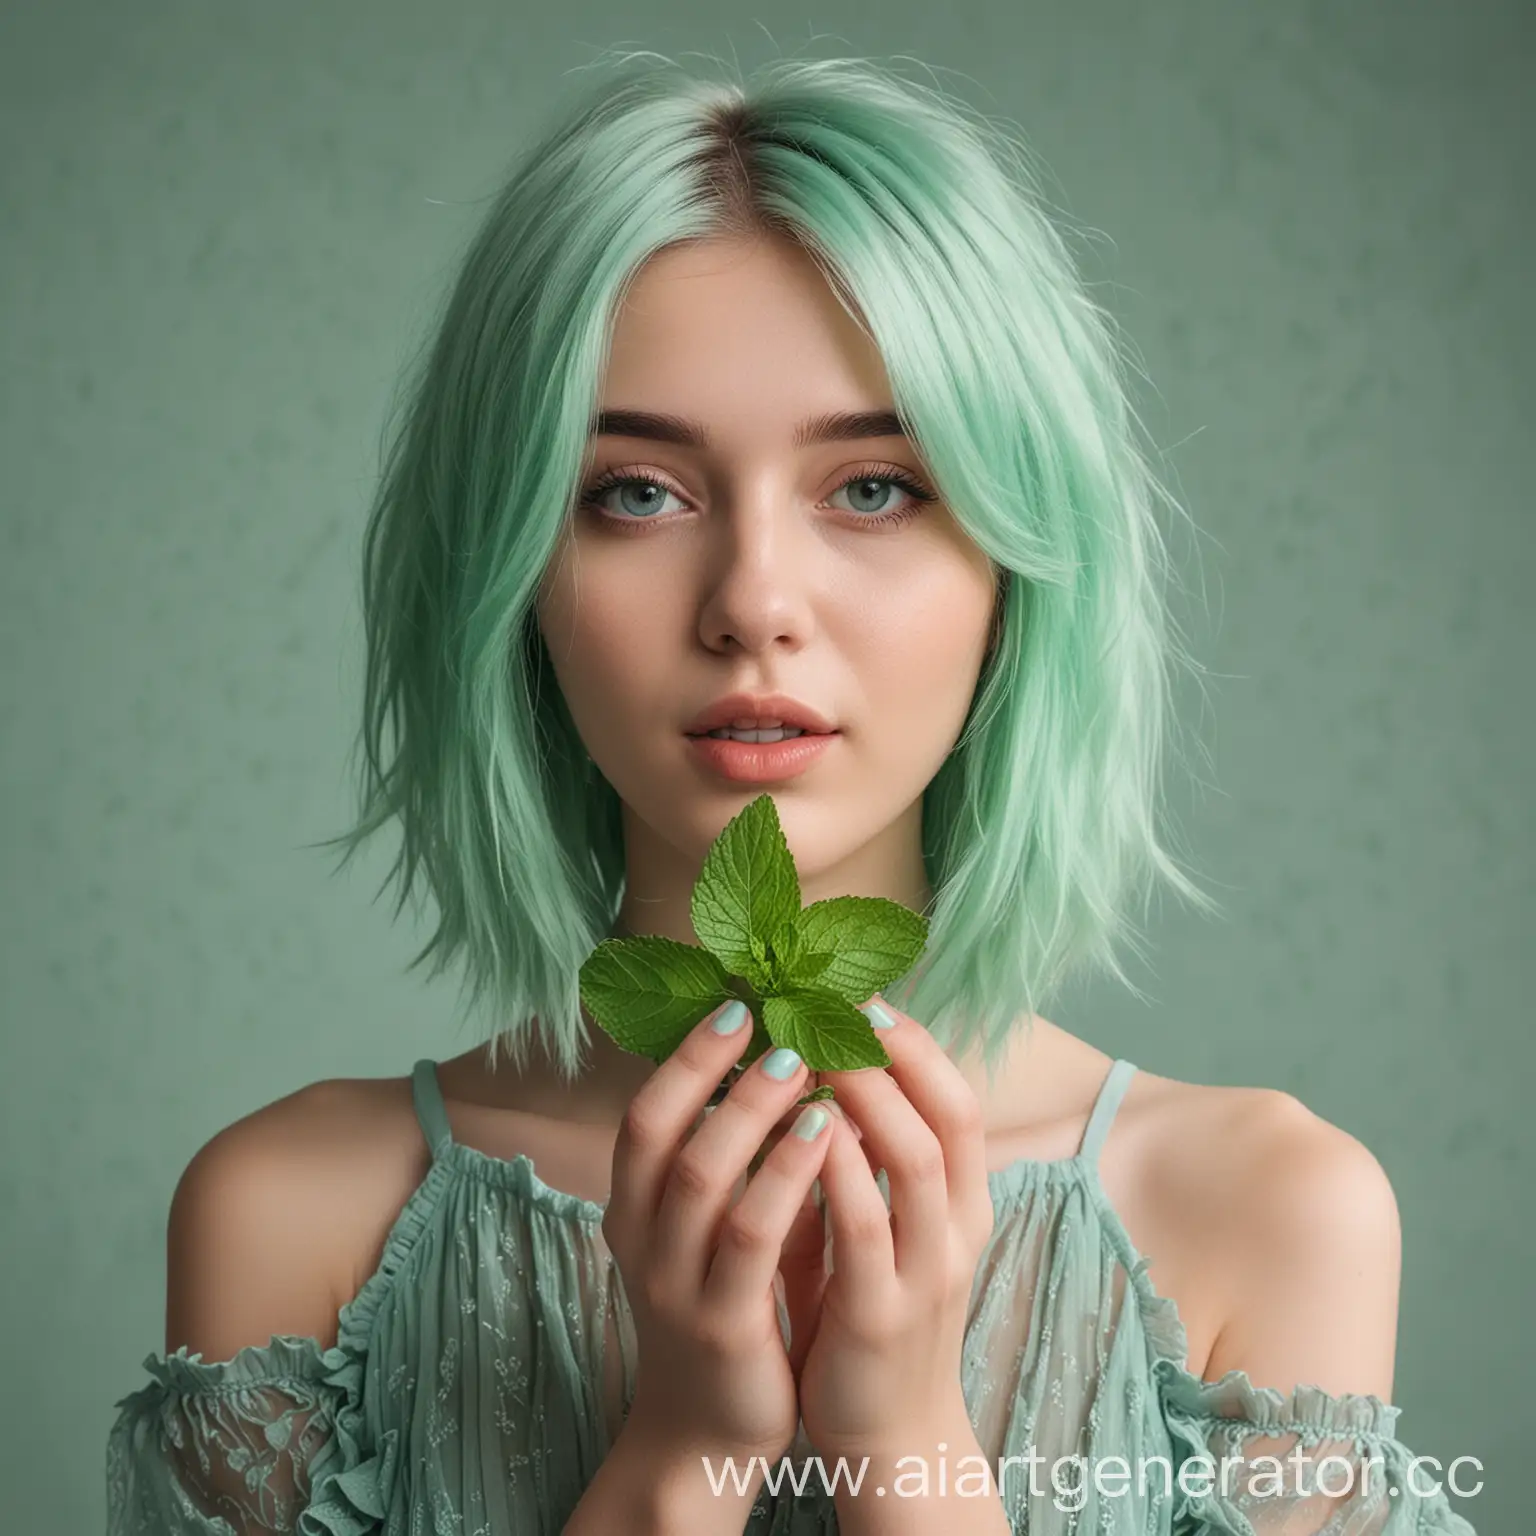 Beautiful-23YearOld-Model-Girl-with-MintColored-Hair-Holding-Mint